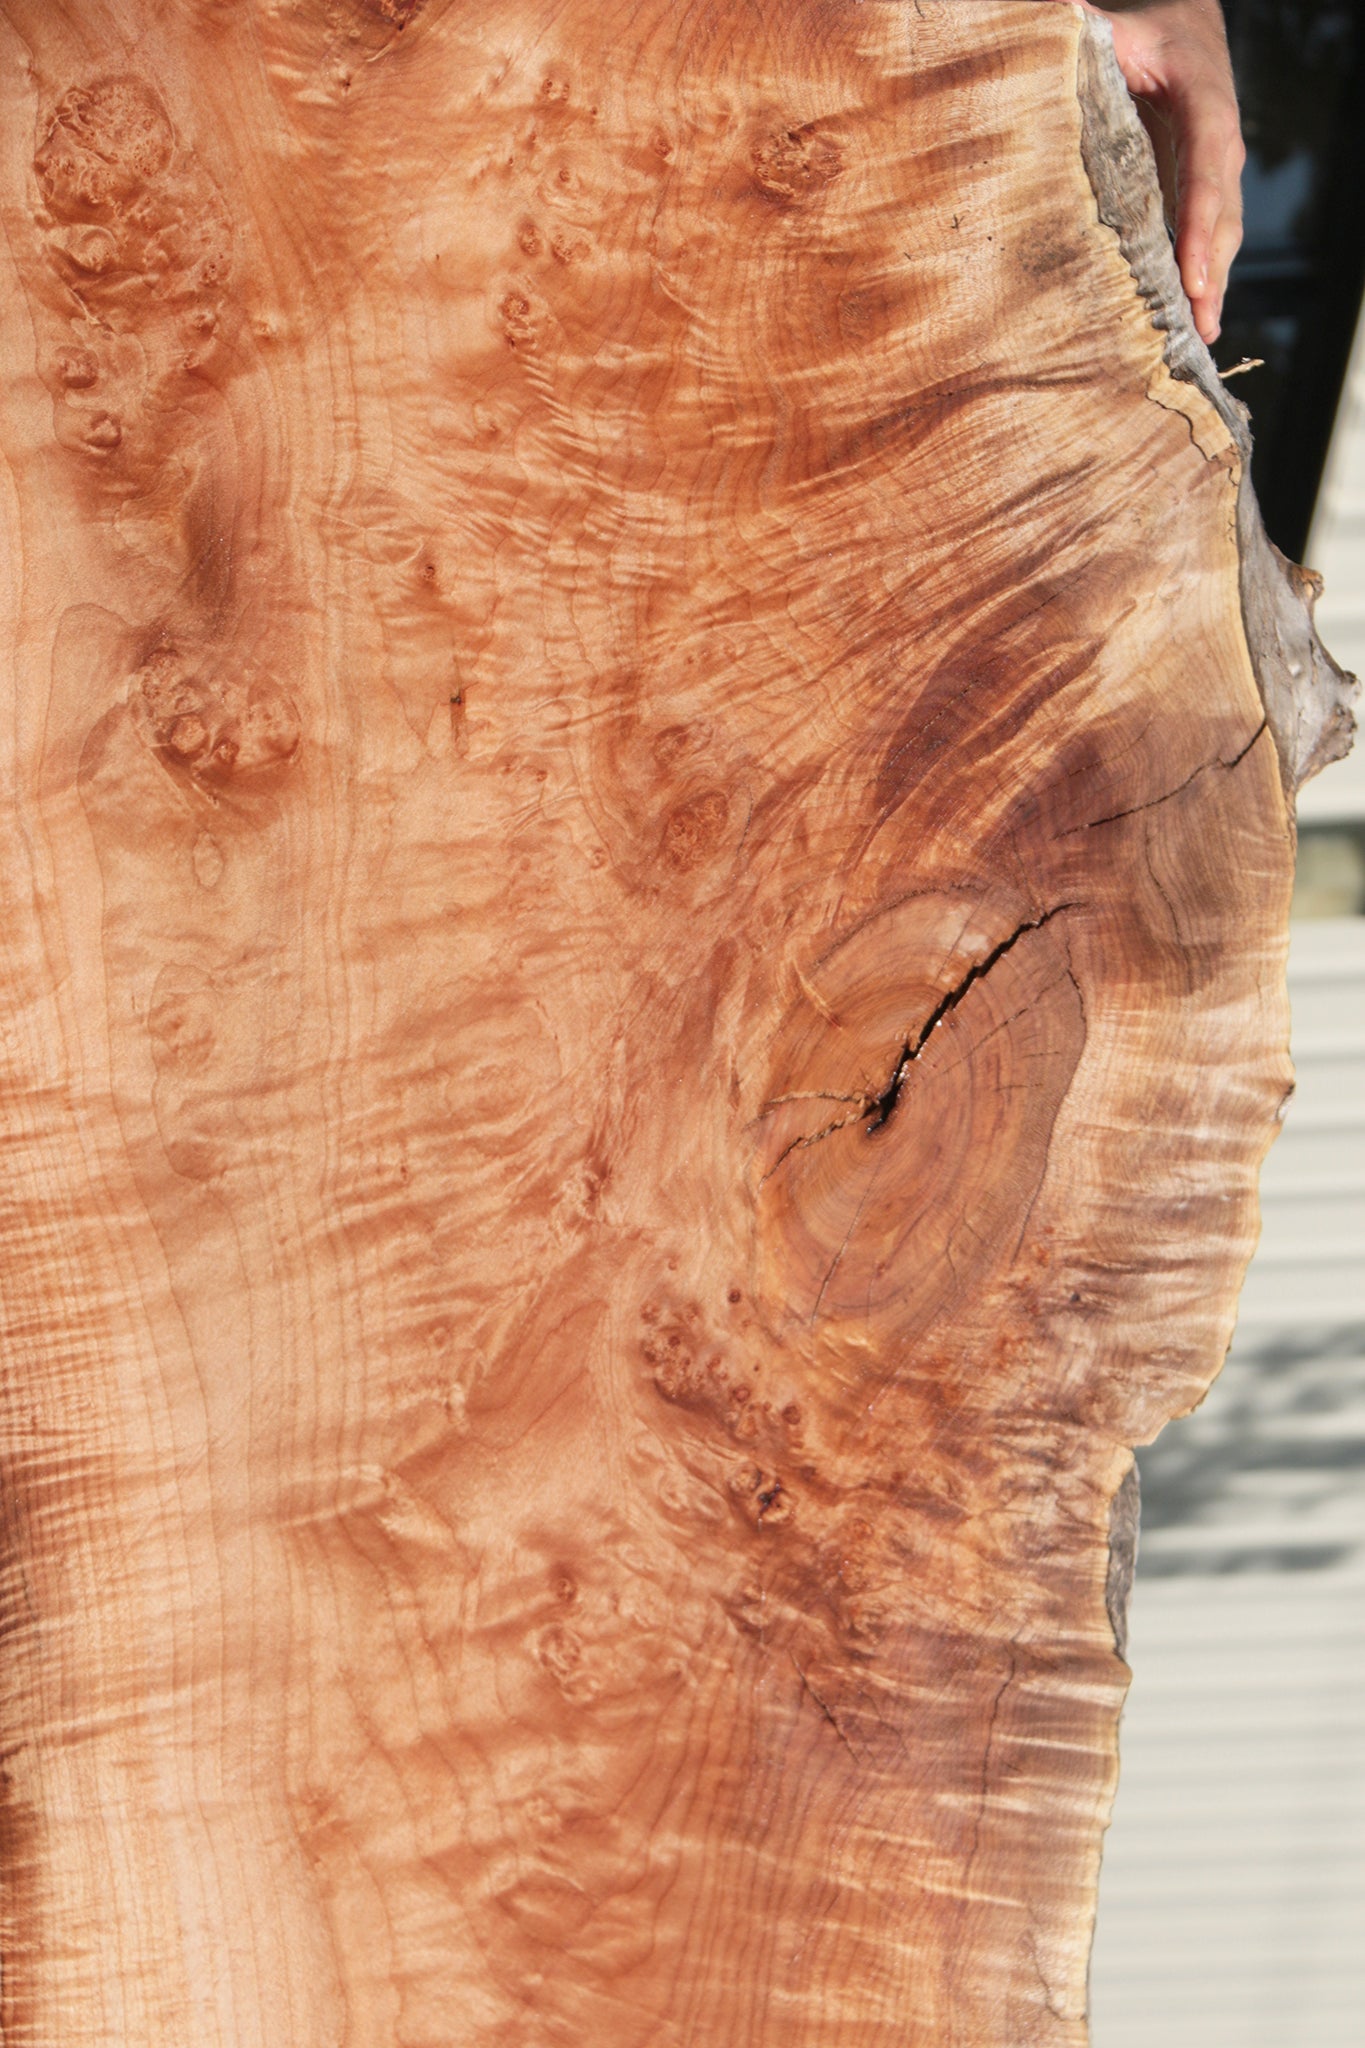 Extra Fancy Rustic Western Maple Live Edge Slab (Free Shipping Excluded)